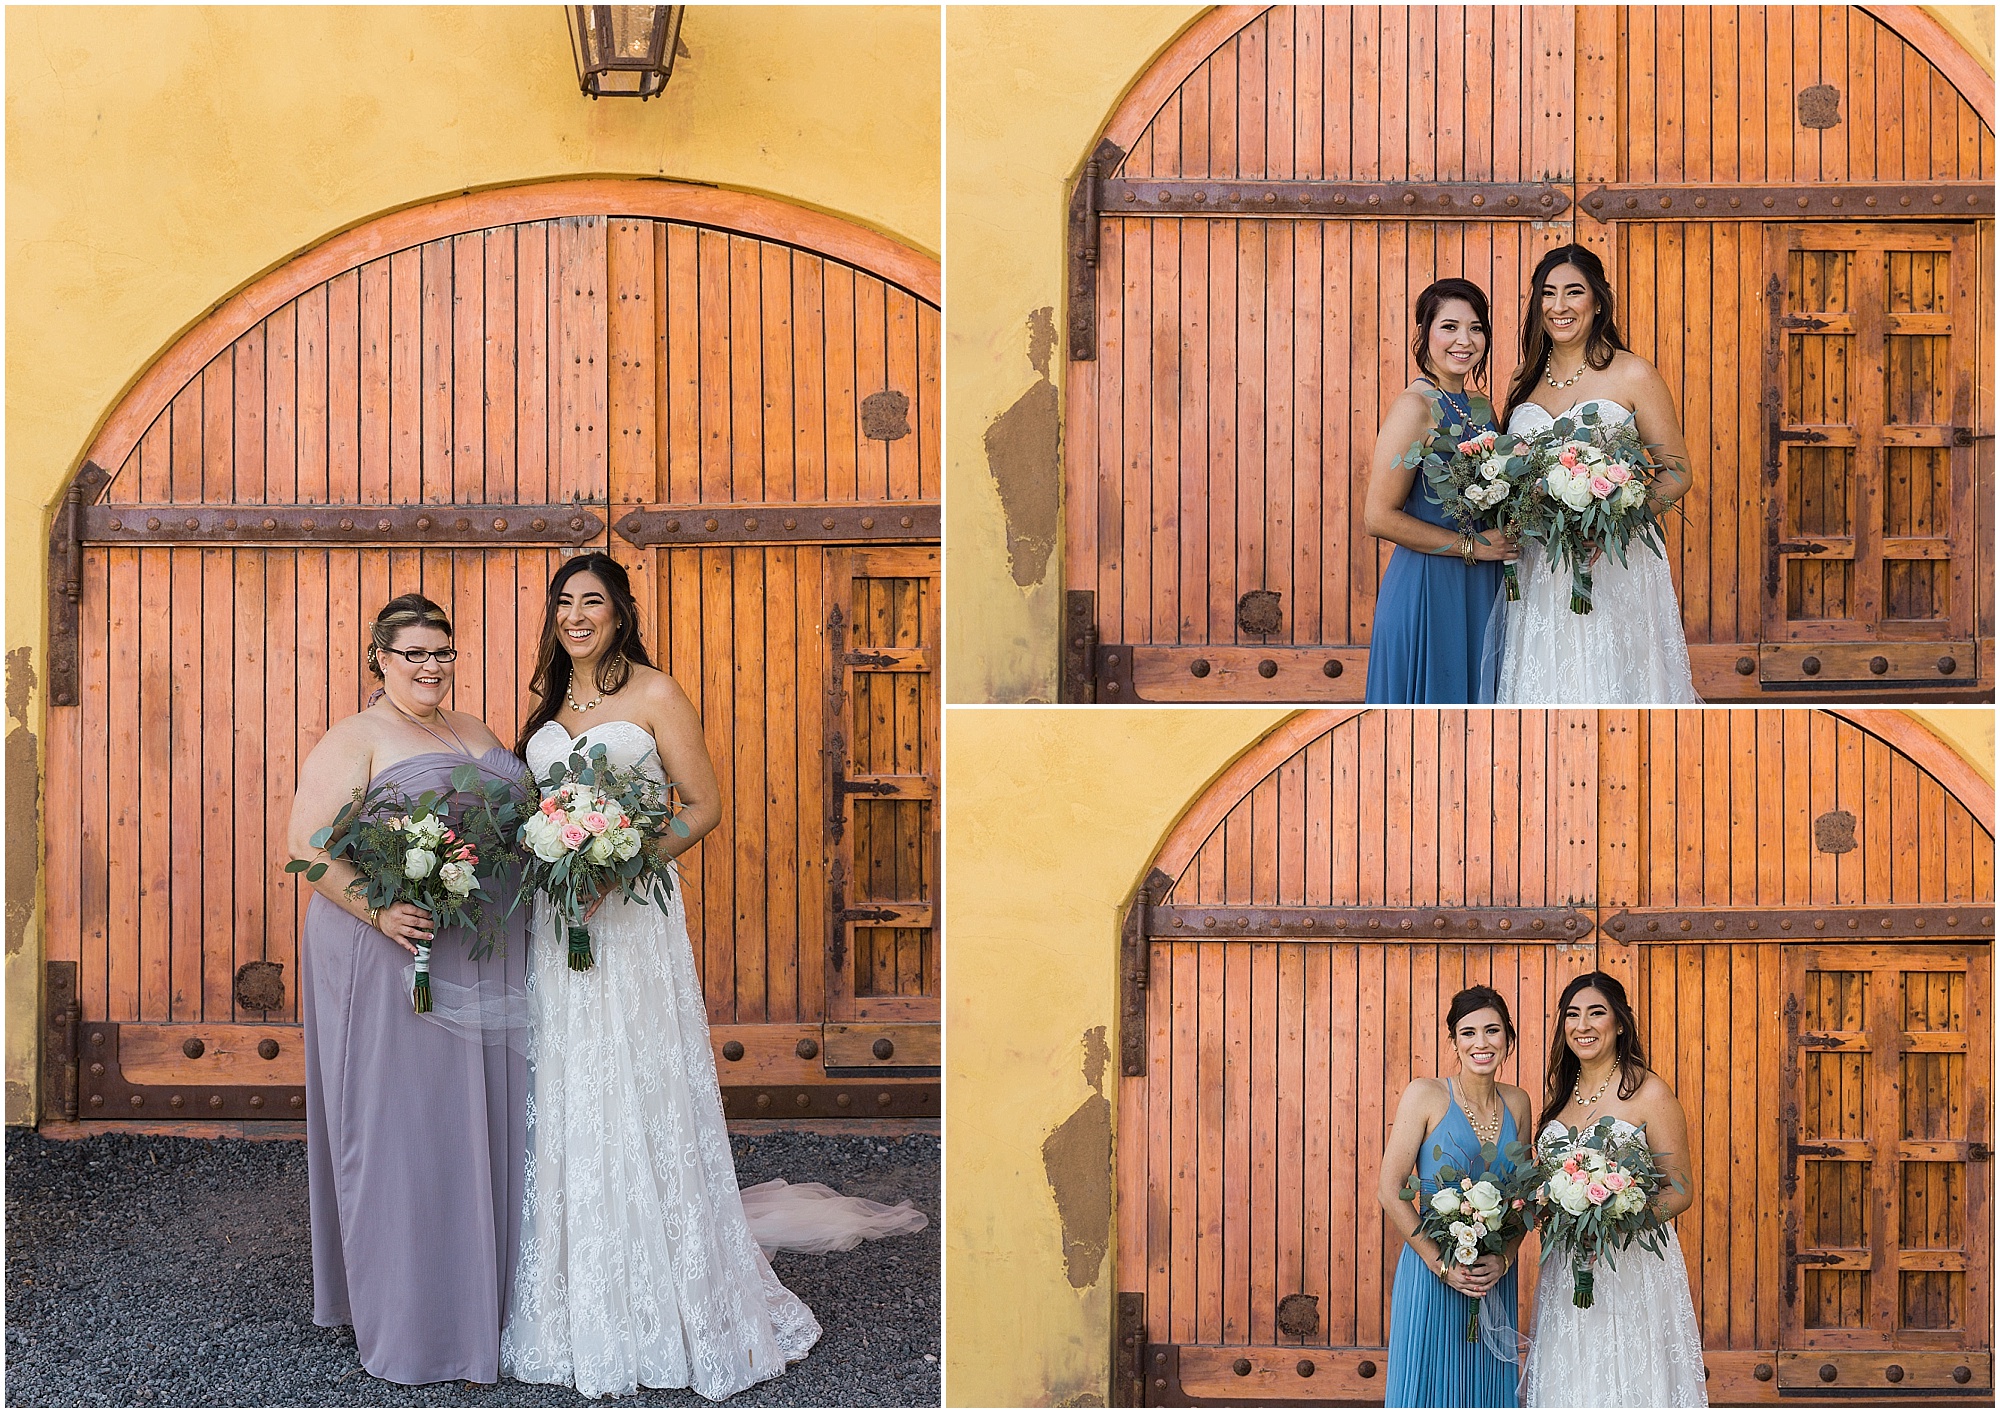 The bride poses with each brid